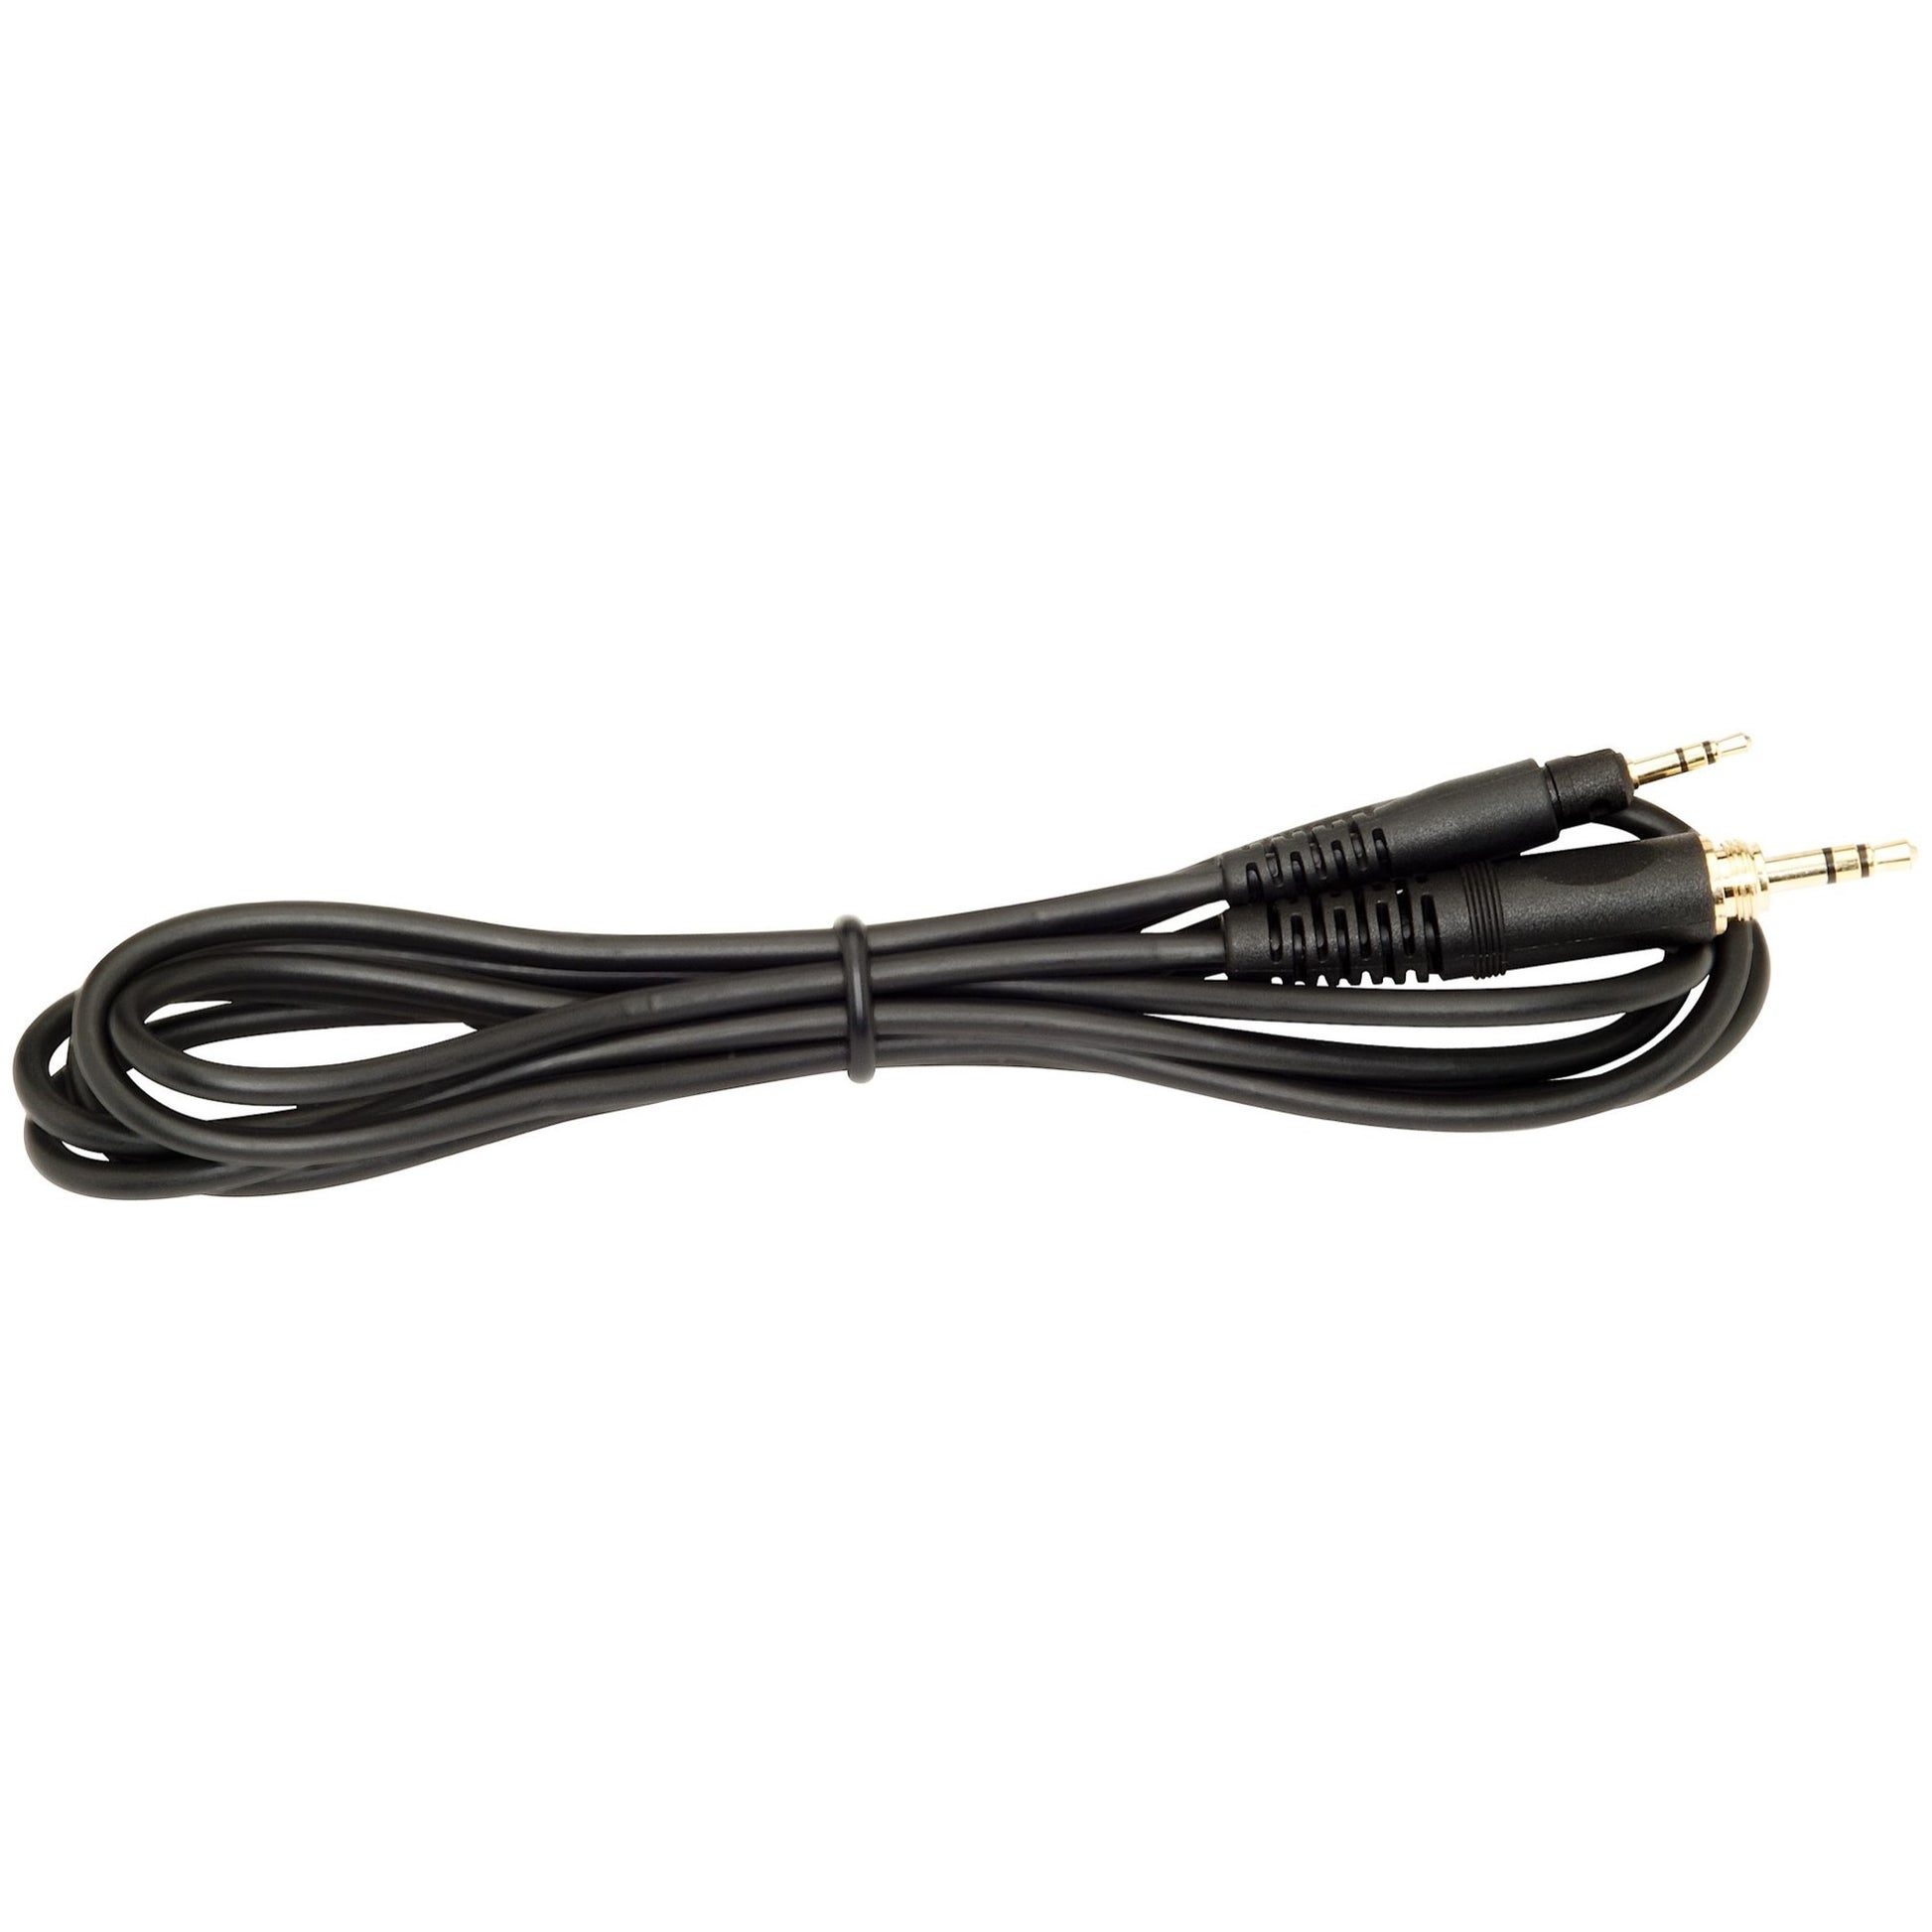 KRK KNS Headphone Replacement Cable, Straight, 2.5 Meter